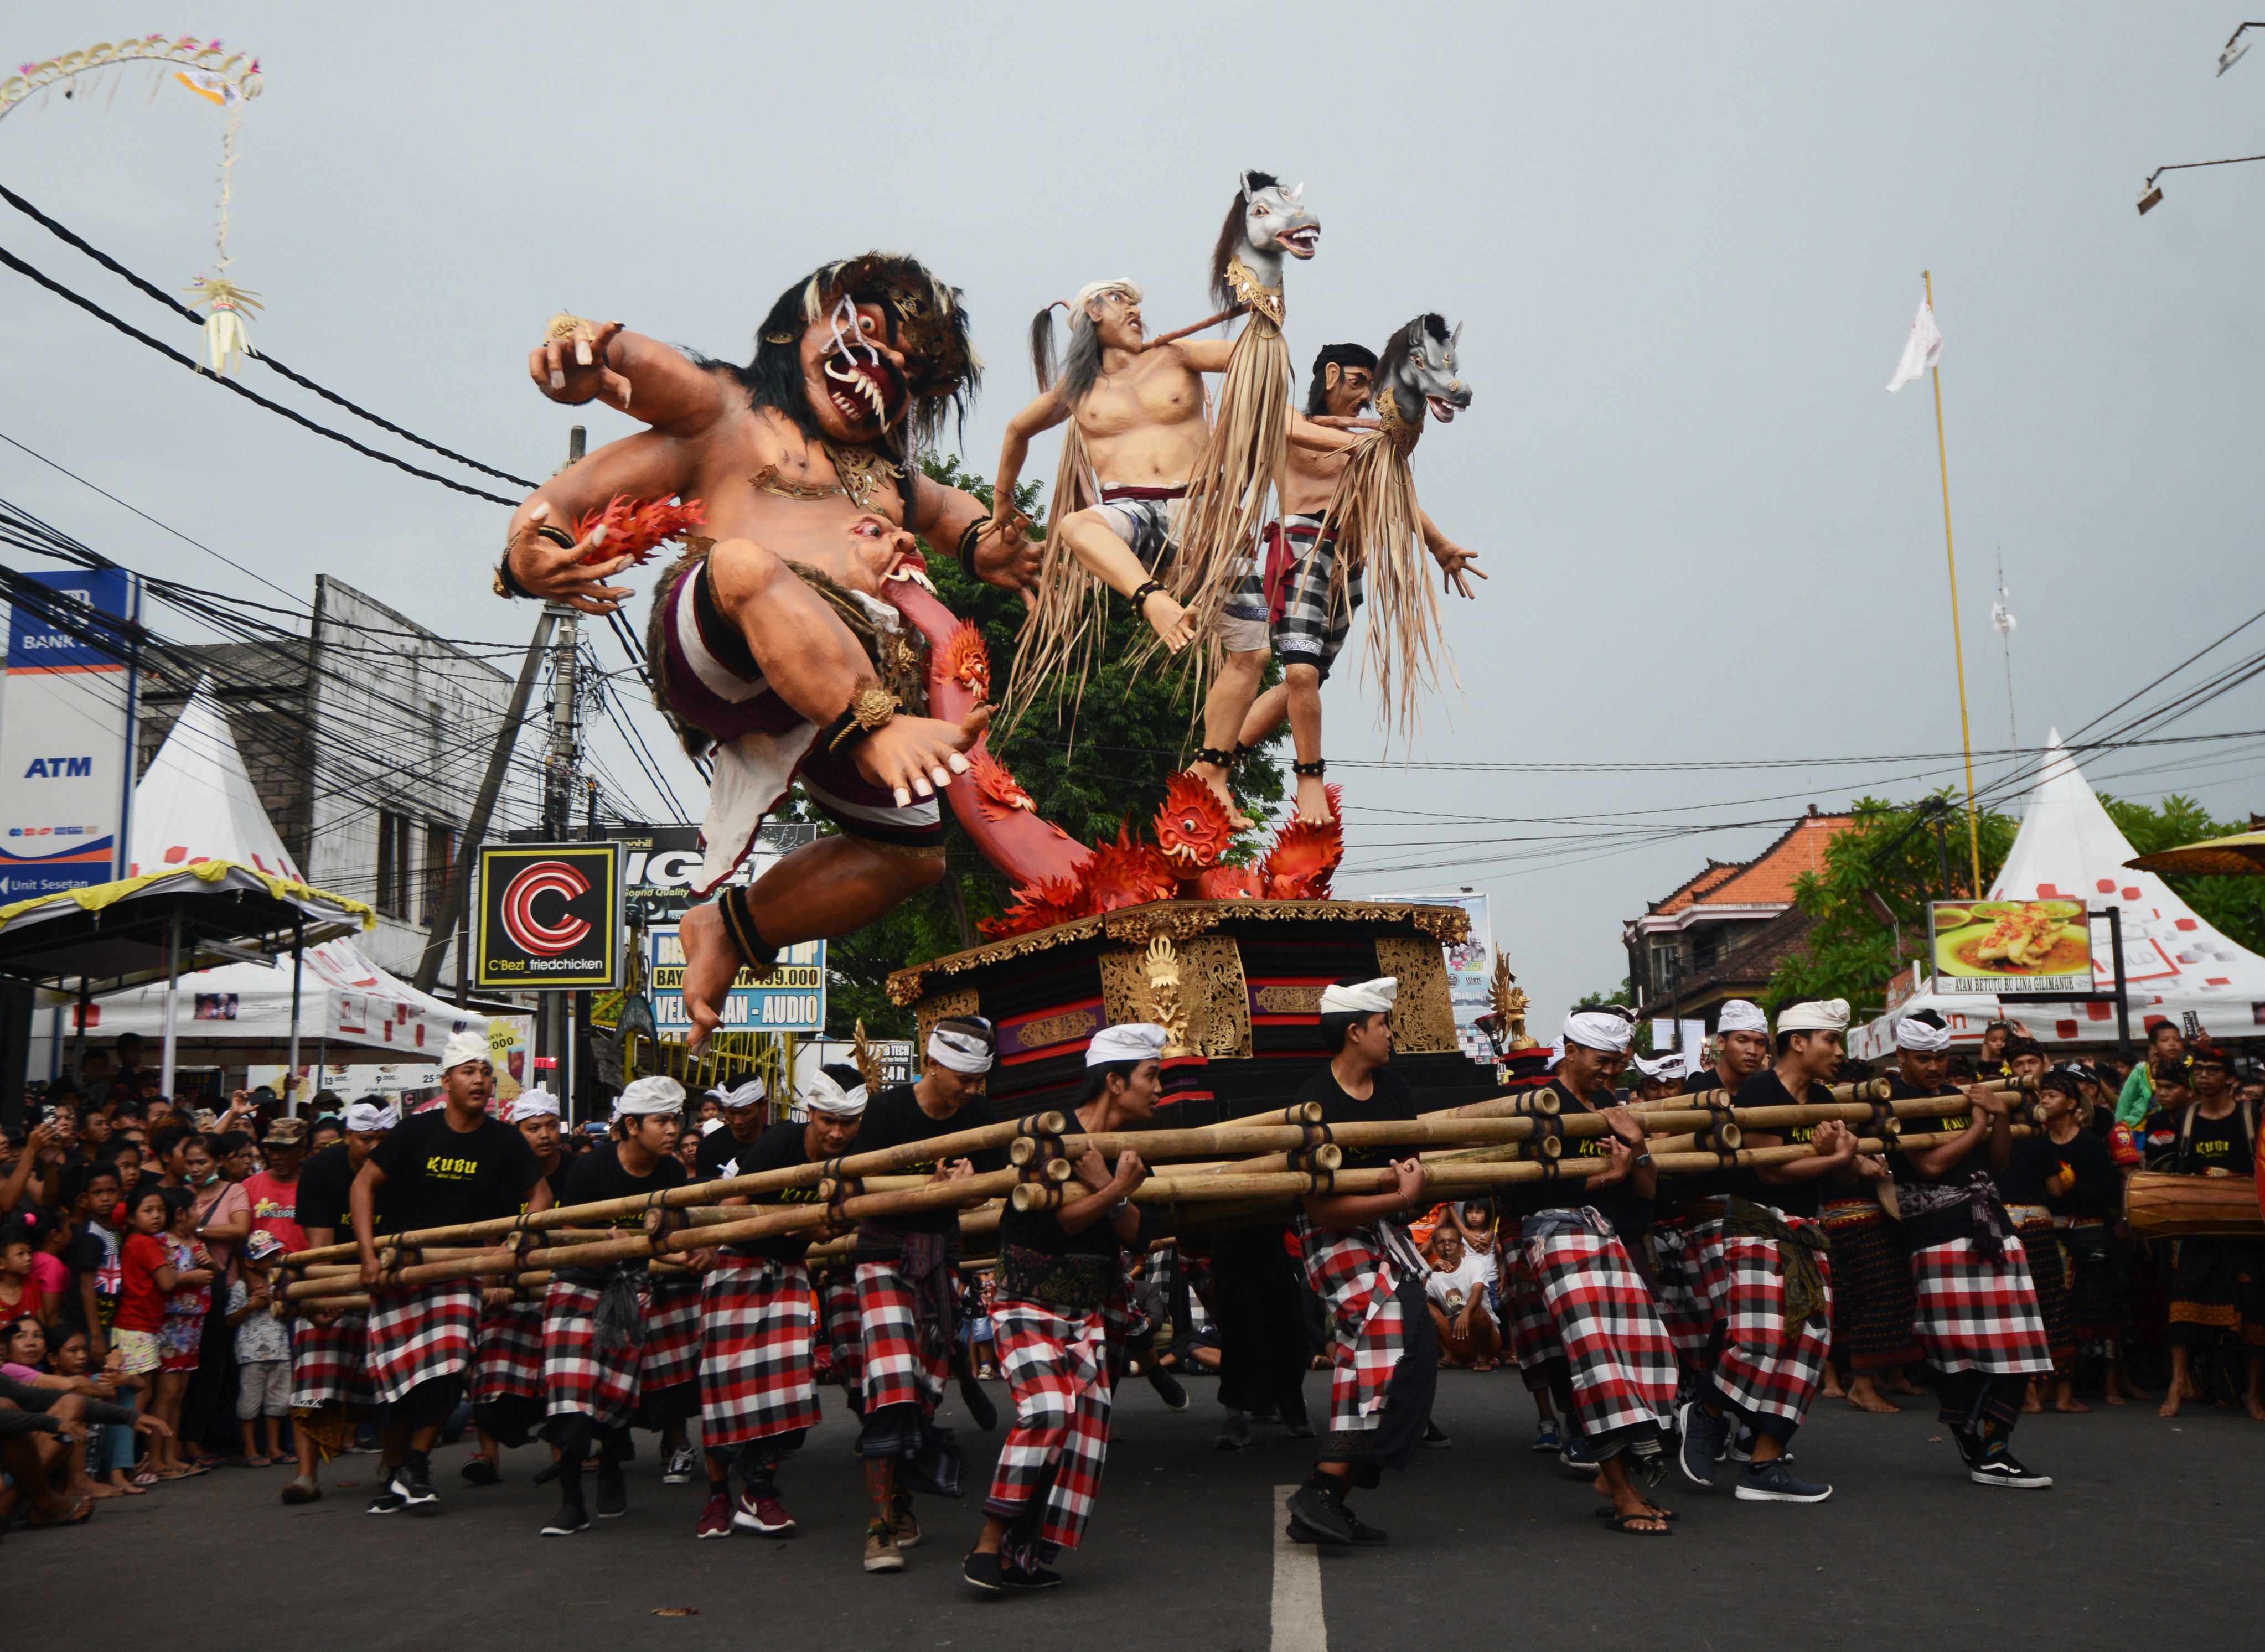 Balinese people carry an Ogoh-Ogoh effigy during a parade ahead of the "Day of Silence" in Denpasar on Indonesia's resort island of Bali on March 6, 2019. (SONNY TUMBELAKA/AFP/Getty Images)